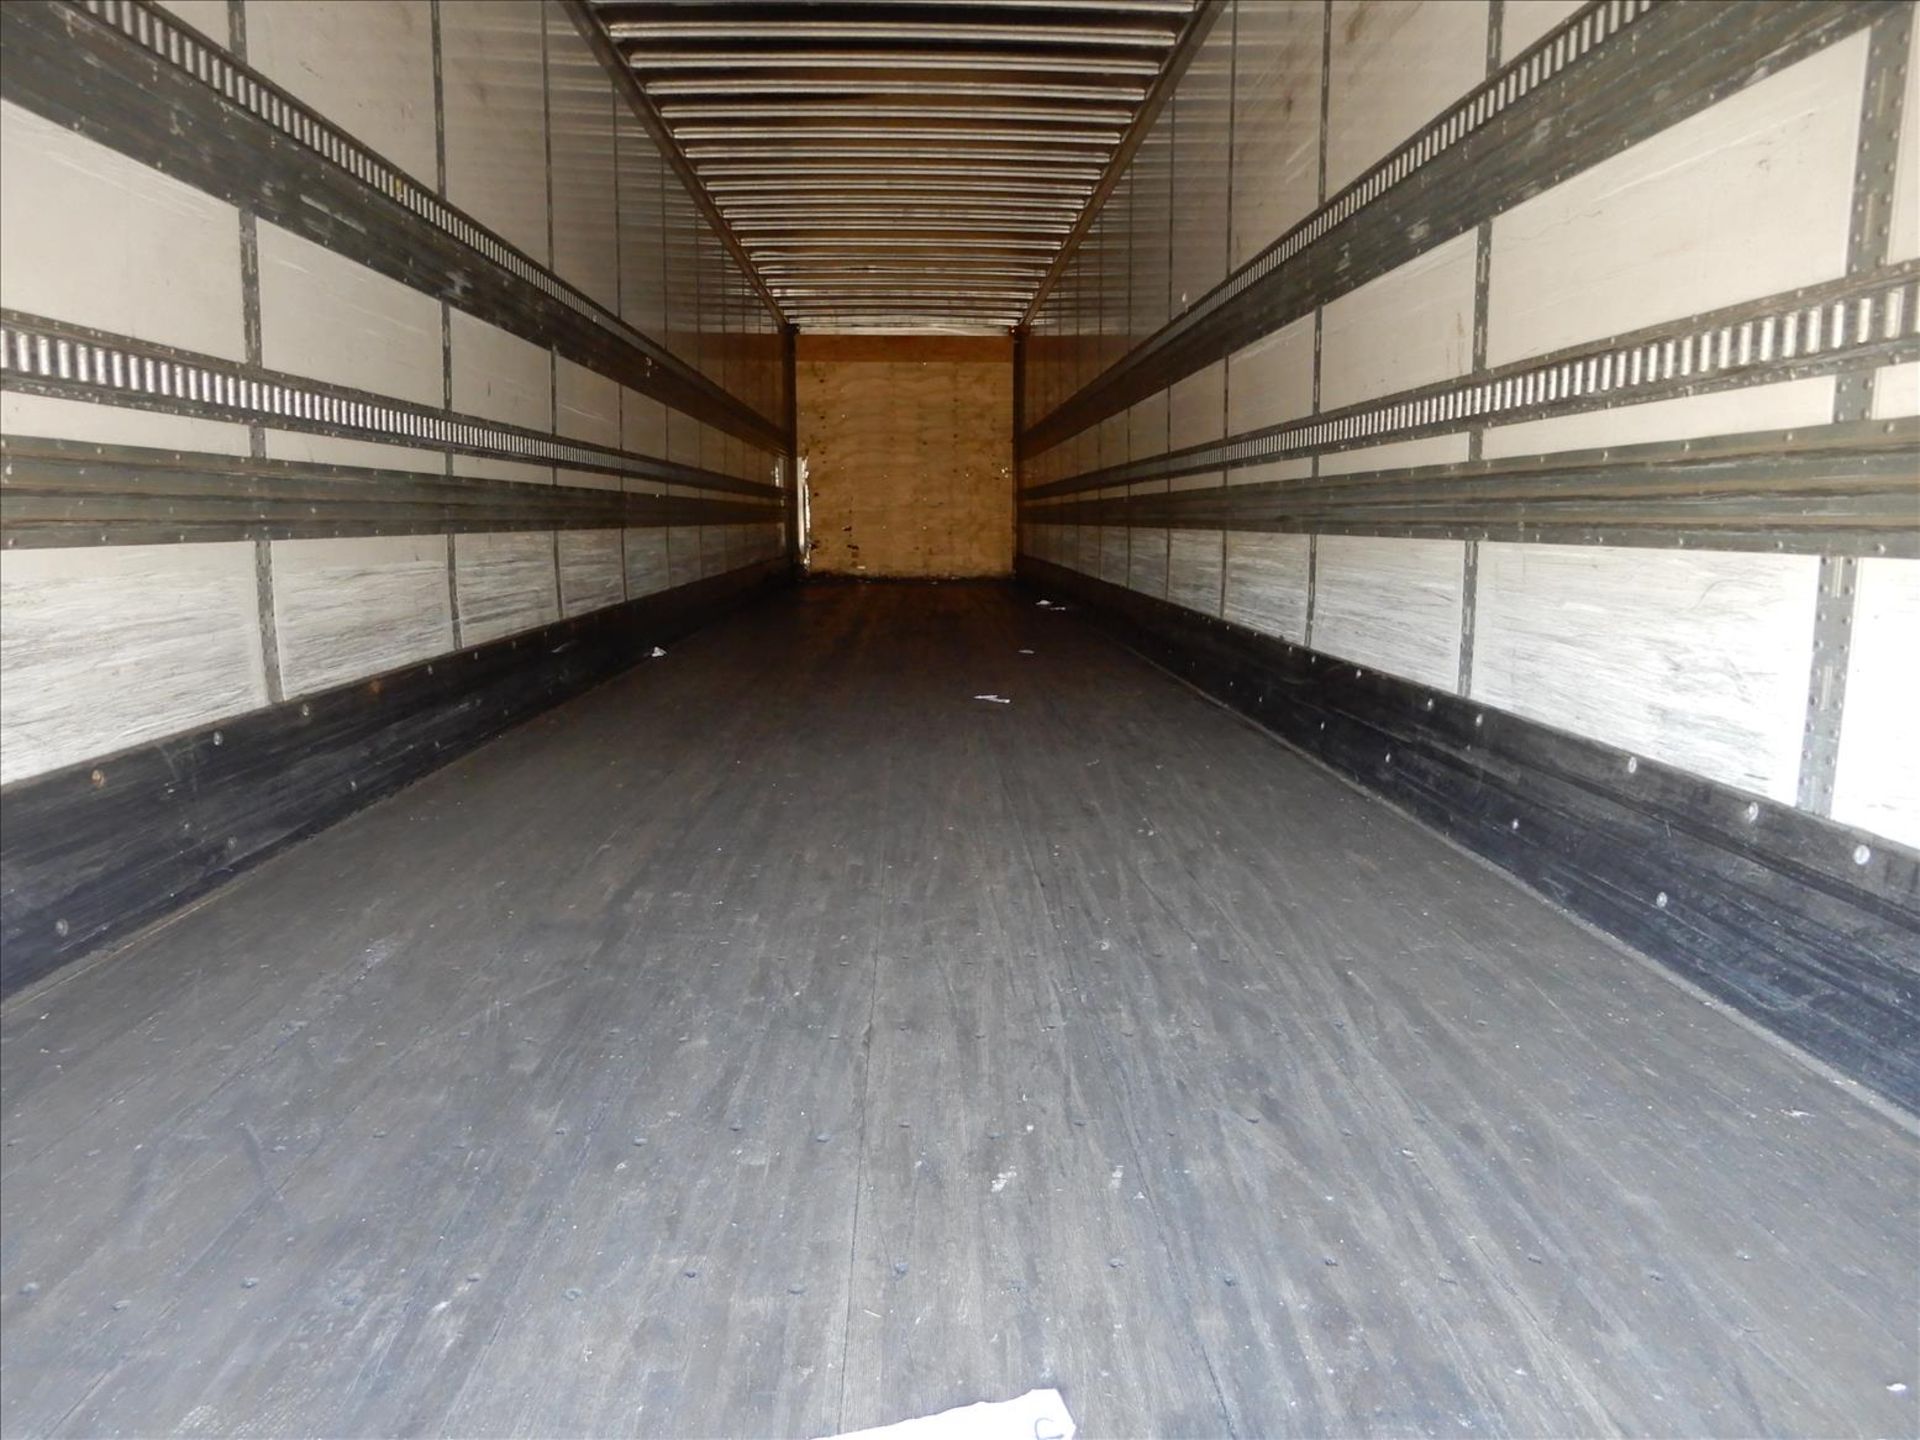 2012 Stoughton Trailer - Located in Indianapolis, IN - Image 28 of 32